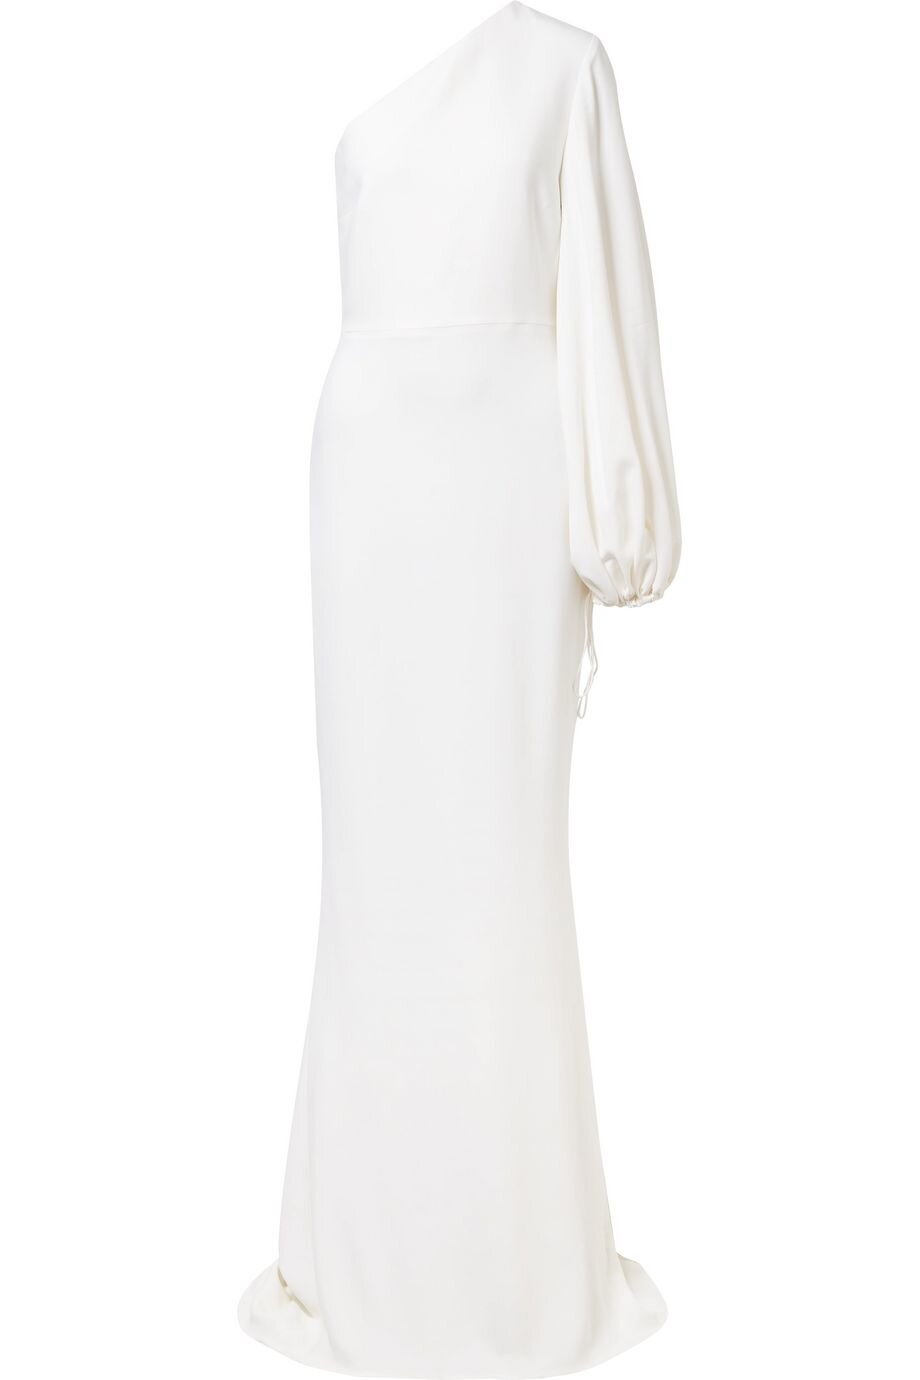 Stella McCartney One-Shoulder Stretch-Cady Gown in White — UFO No More